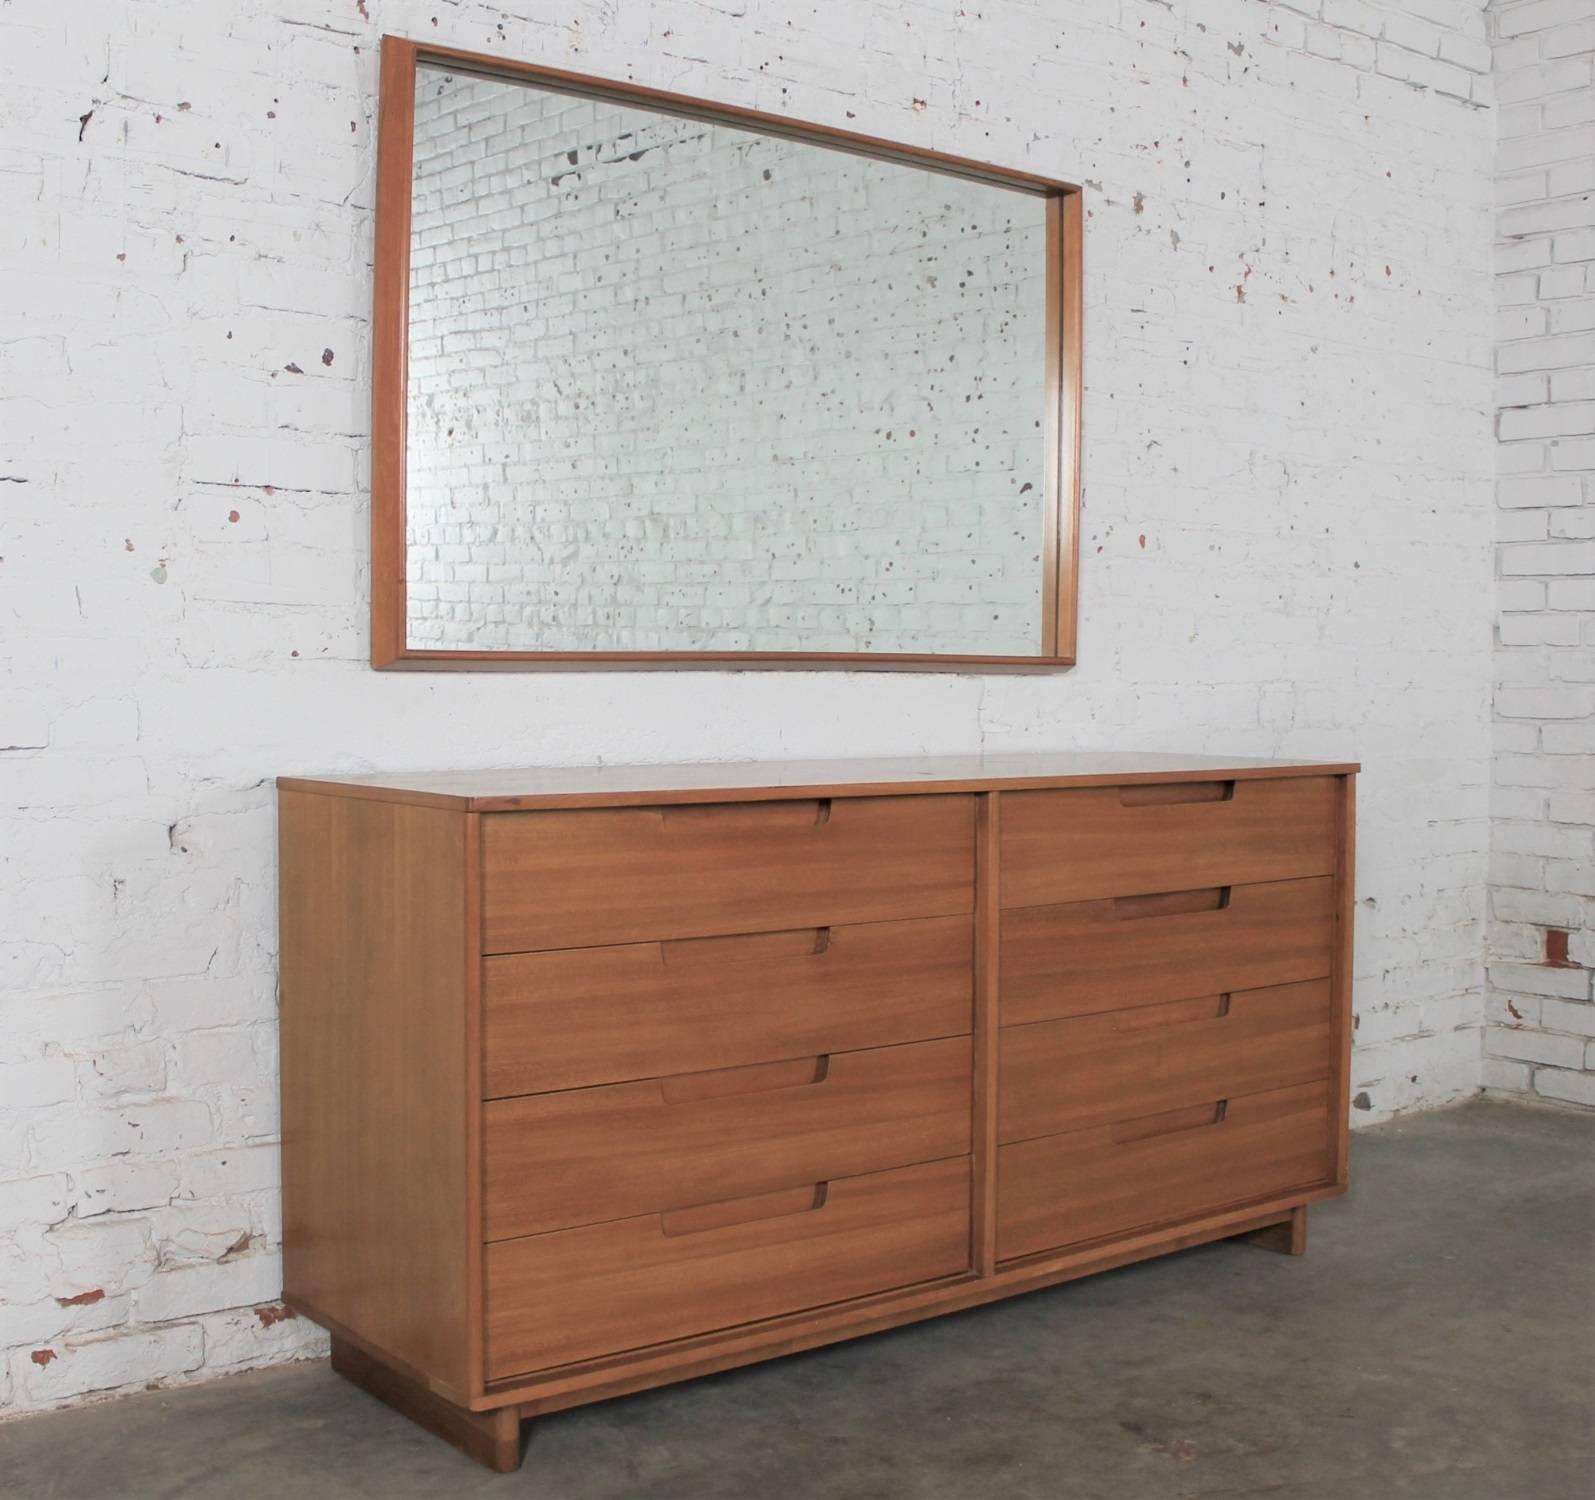 Handsome nine-drawer Mid-Century Modern dresser by Milo Baughman from Today’s Living line for Drexel. circa 1952 and in wonderful vintage condition.

This is a fabulous dresser and mirror from Drexel’s “Today’s Living” collection which debuted in